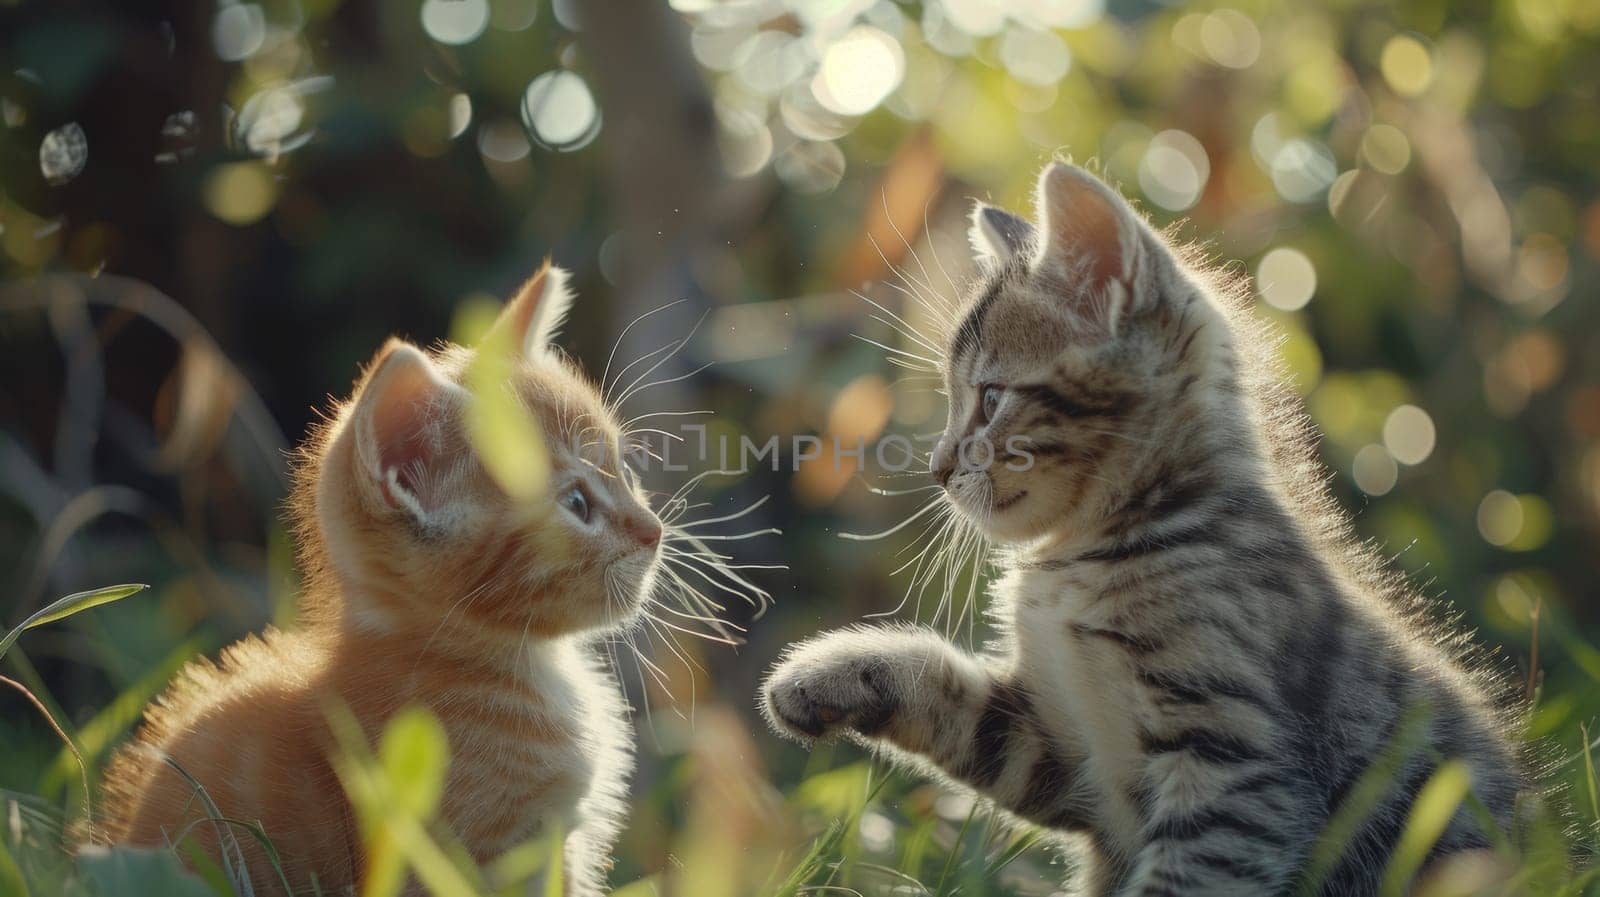 Two kittens sitting in the grass looking at each other